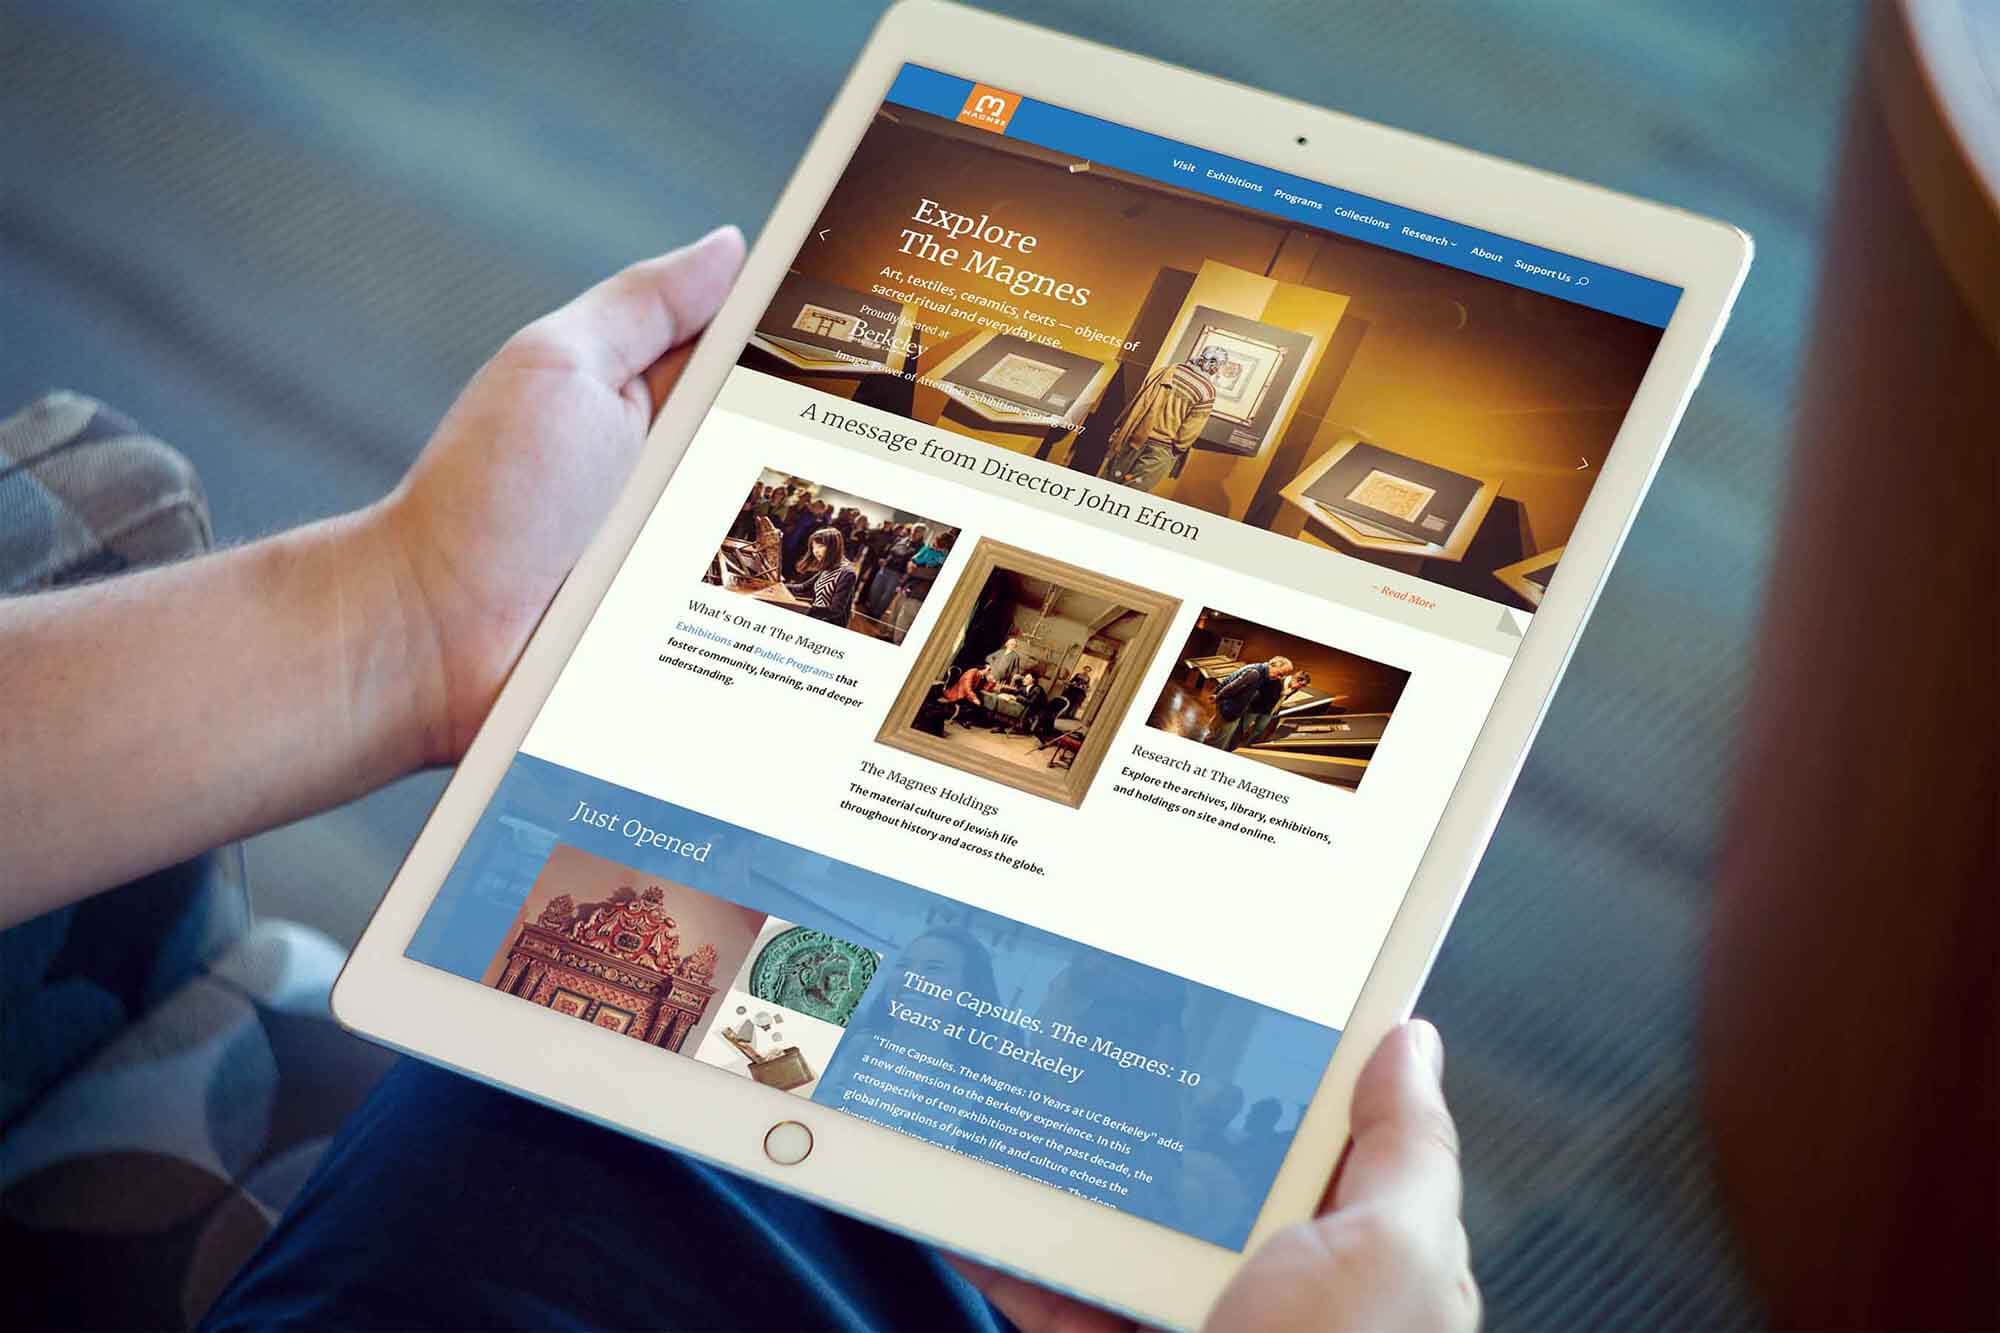 person holding an iPad showing the new Magnes website